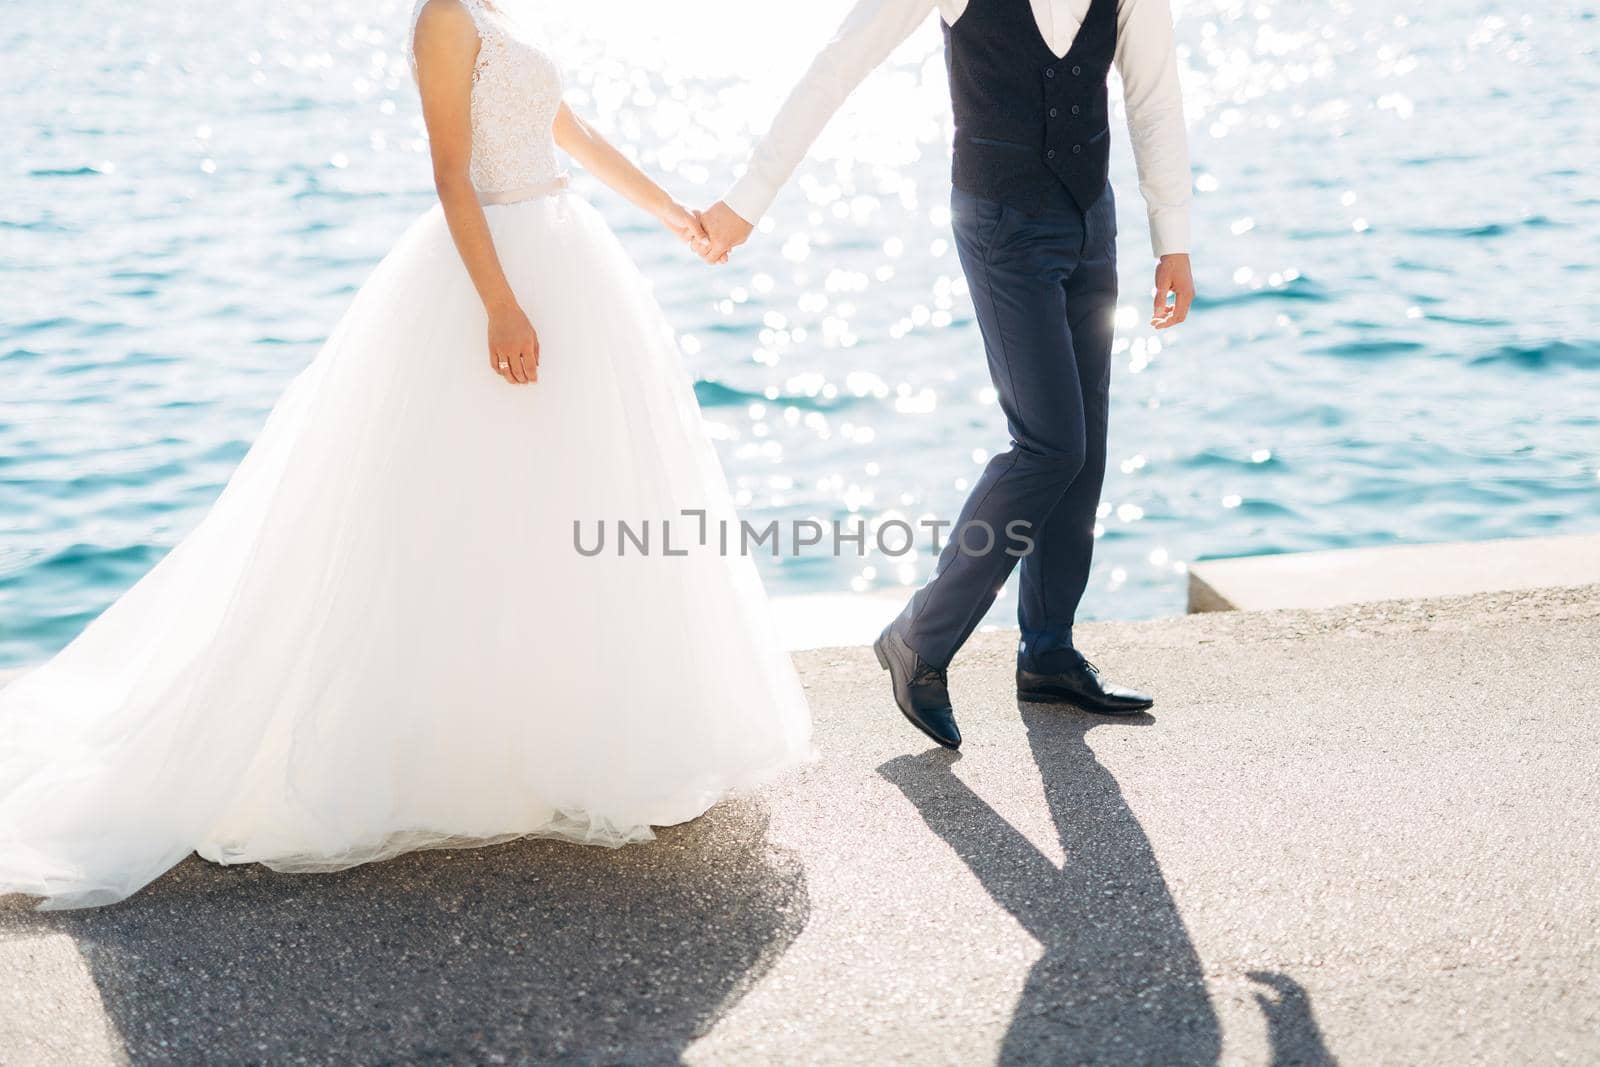 The bride and groom are walking hand in hand on the road by the sea, close-up. High quality photo